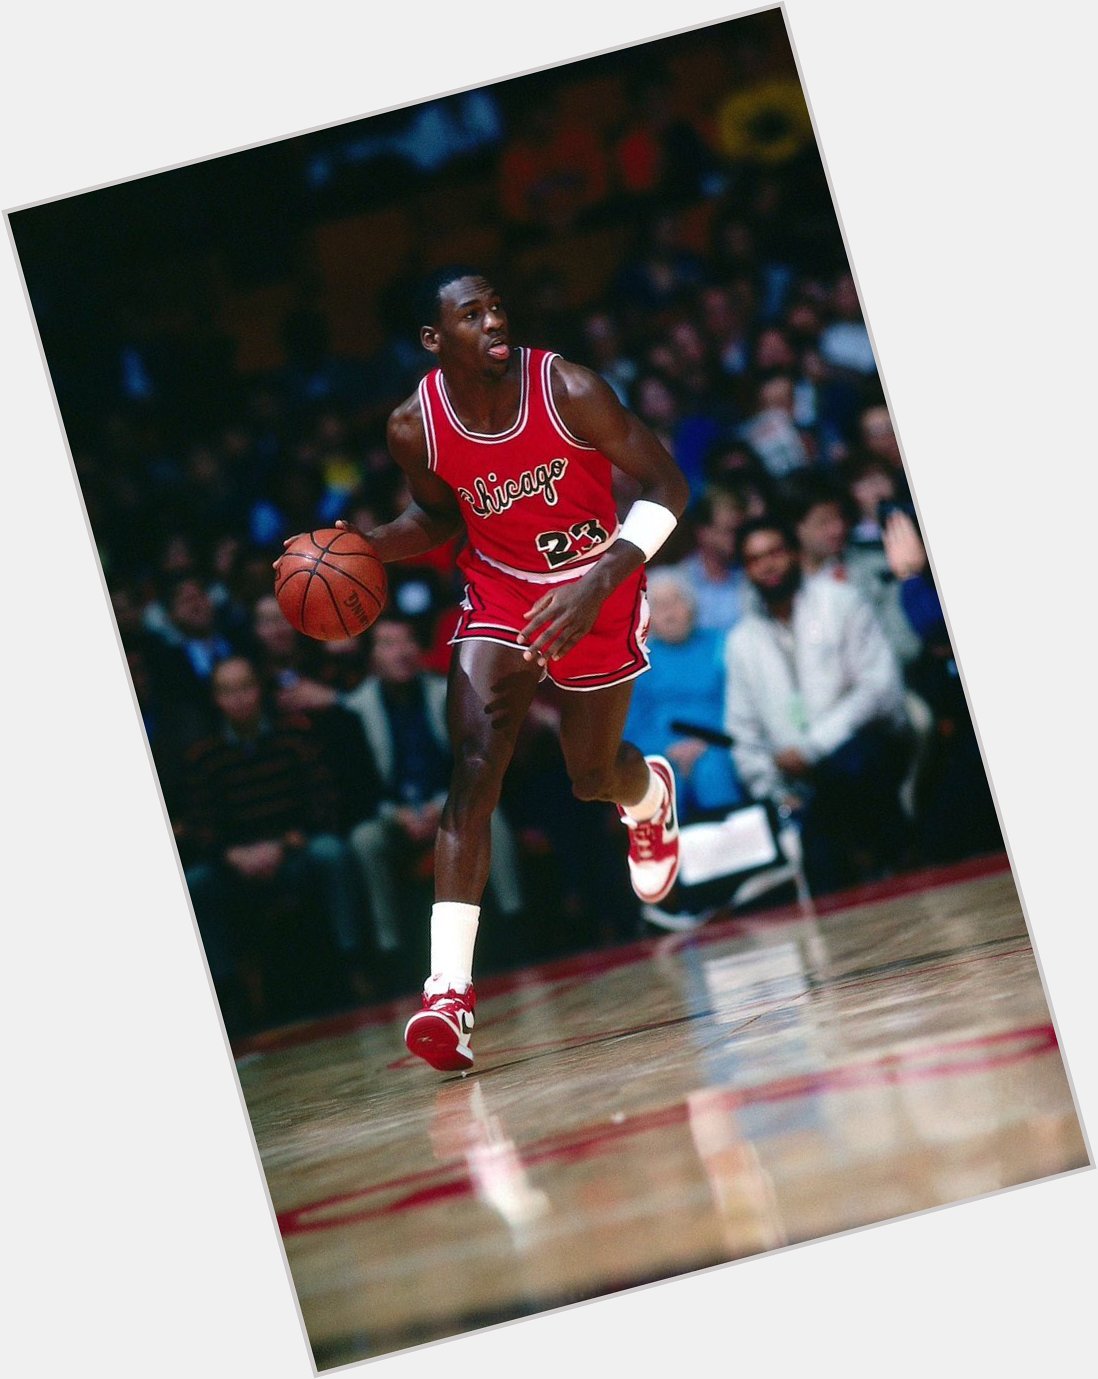 Day 16: We honor the birthday and legacy Michael Jordan. Happy Birthday to the GOAT. 